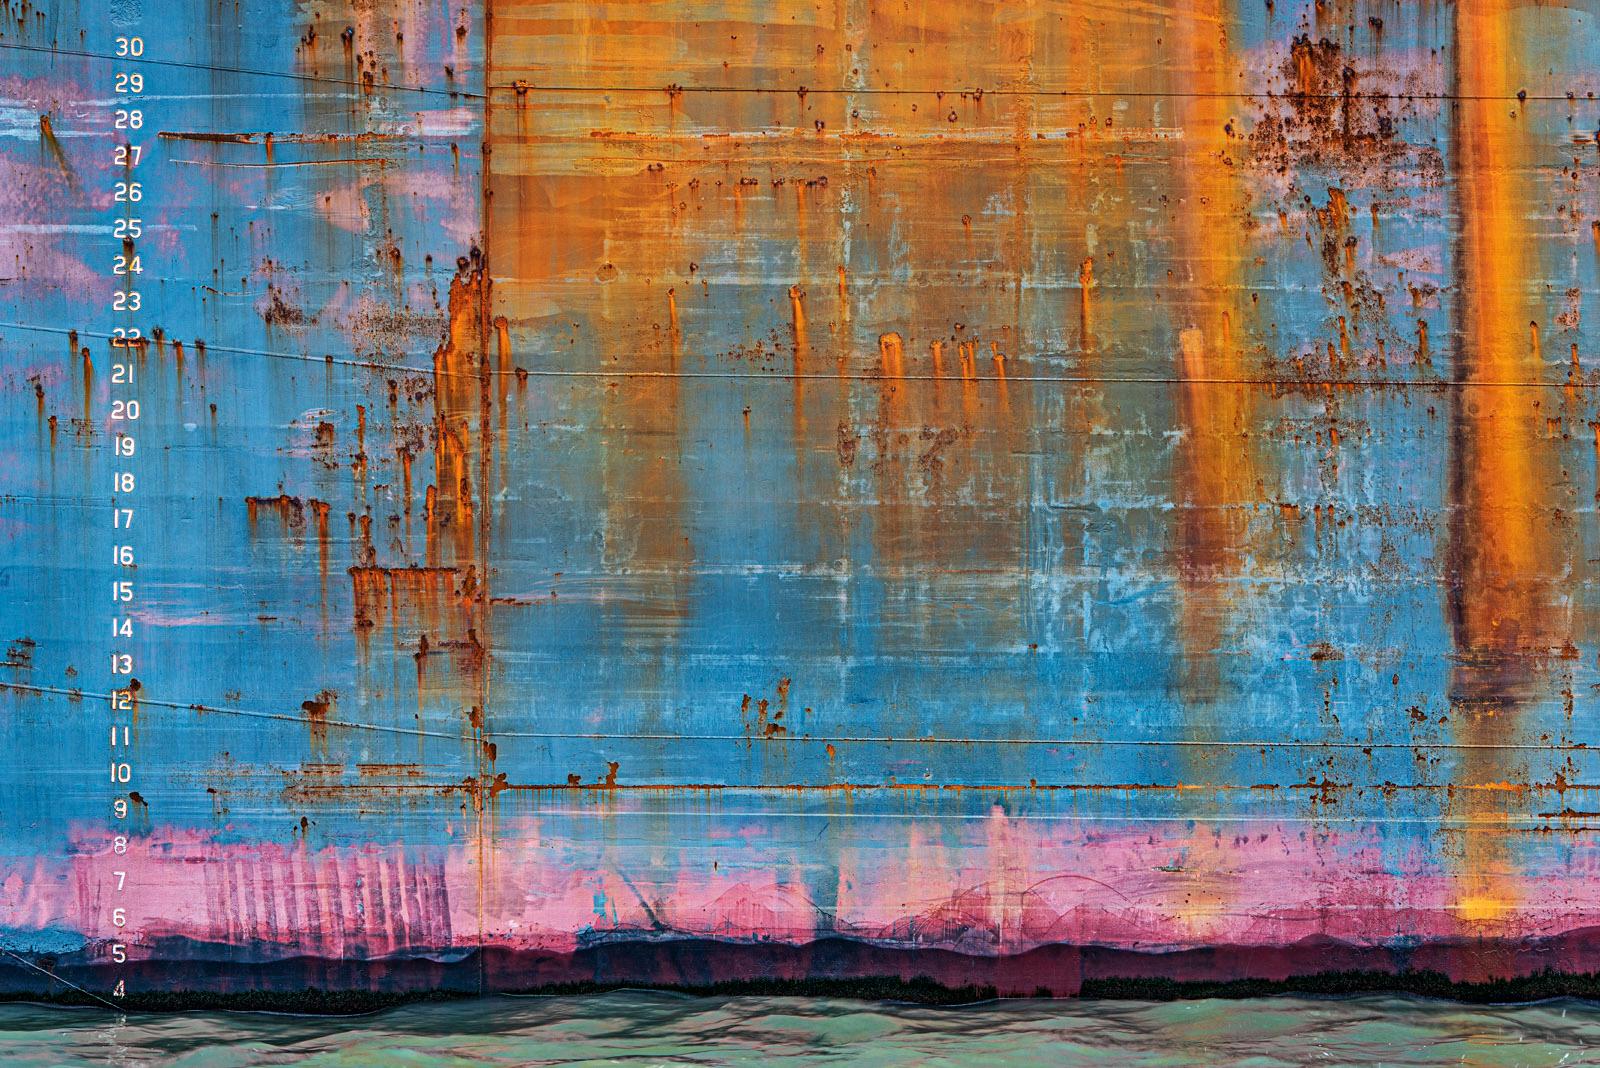 John Mazlish Abstract Photograph - "Waterline"- Colorful Abstract Photo of a Ship in the Harbor, Brooklyn NY